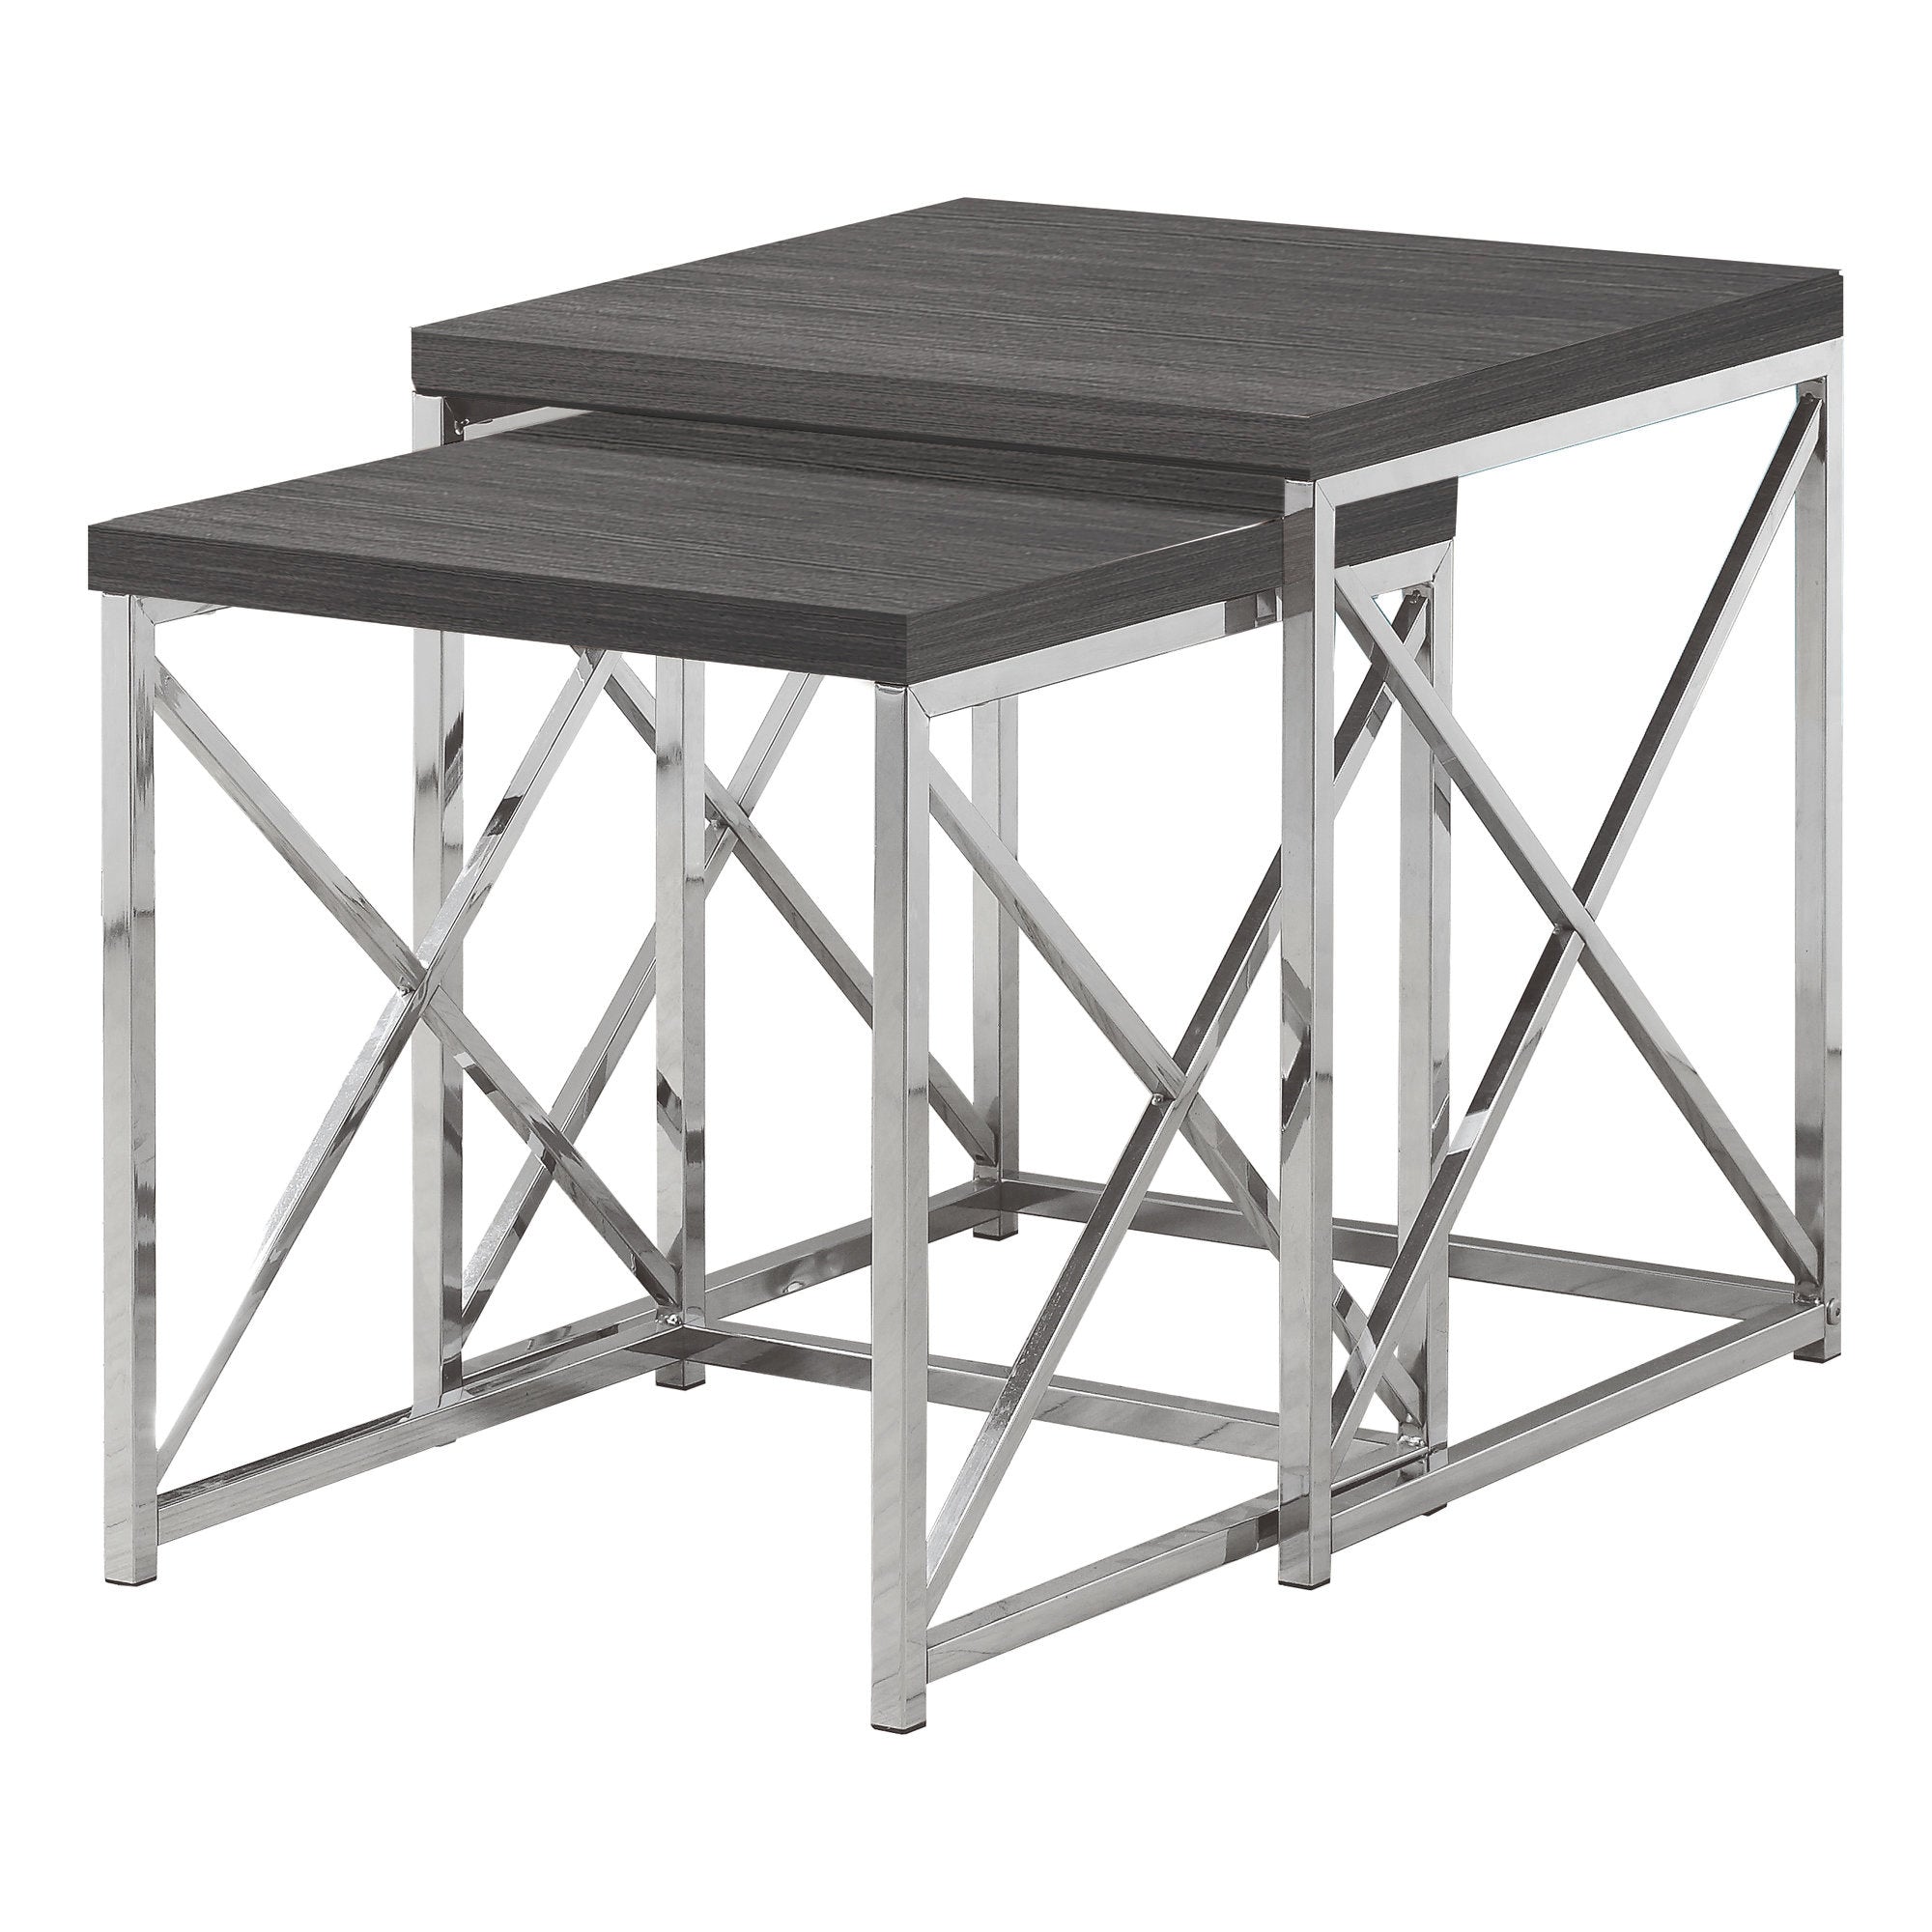 MN-753226    Nesting Table, Set Of 2, Side, End, Metal, Accent, Living Room, Bedroom, Metal Base, Laminate, Grey, Chrome, Contemporary, Modern